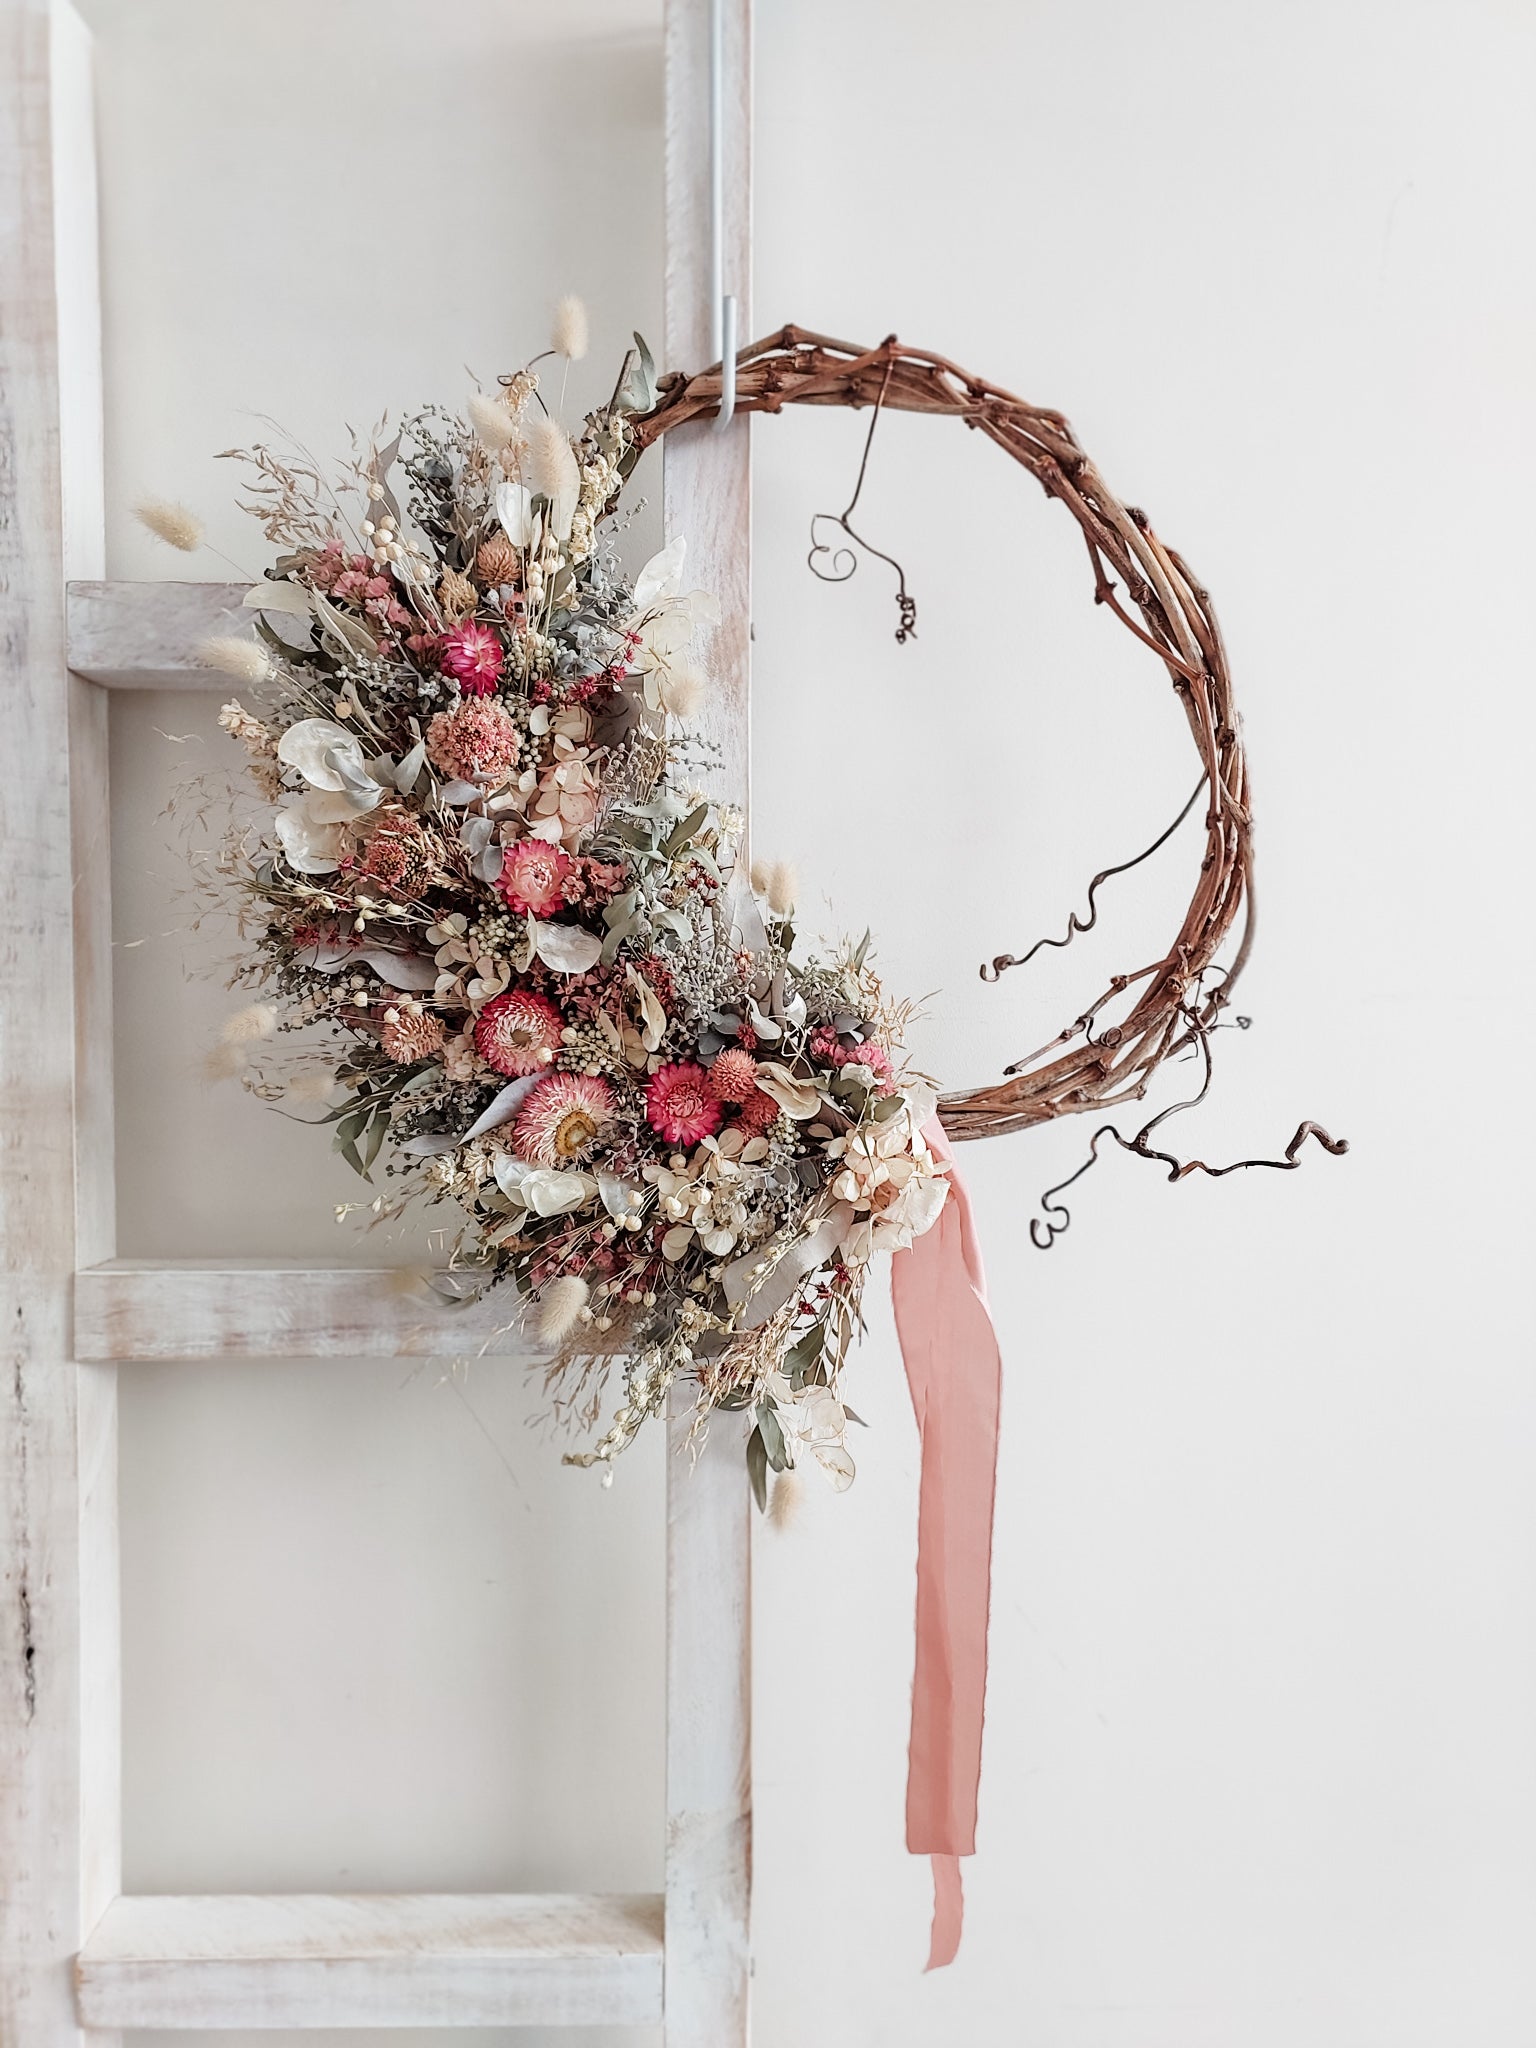 Dried flower wreath in a rustic style in pink and green tones on a grapevine base – distant view.